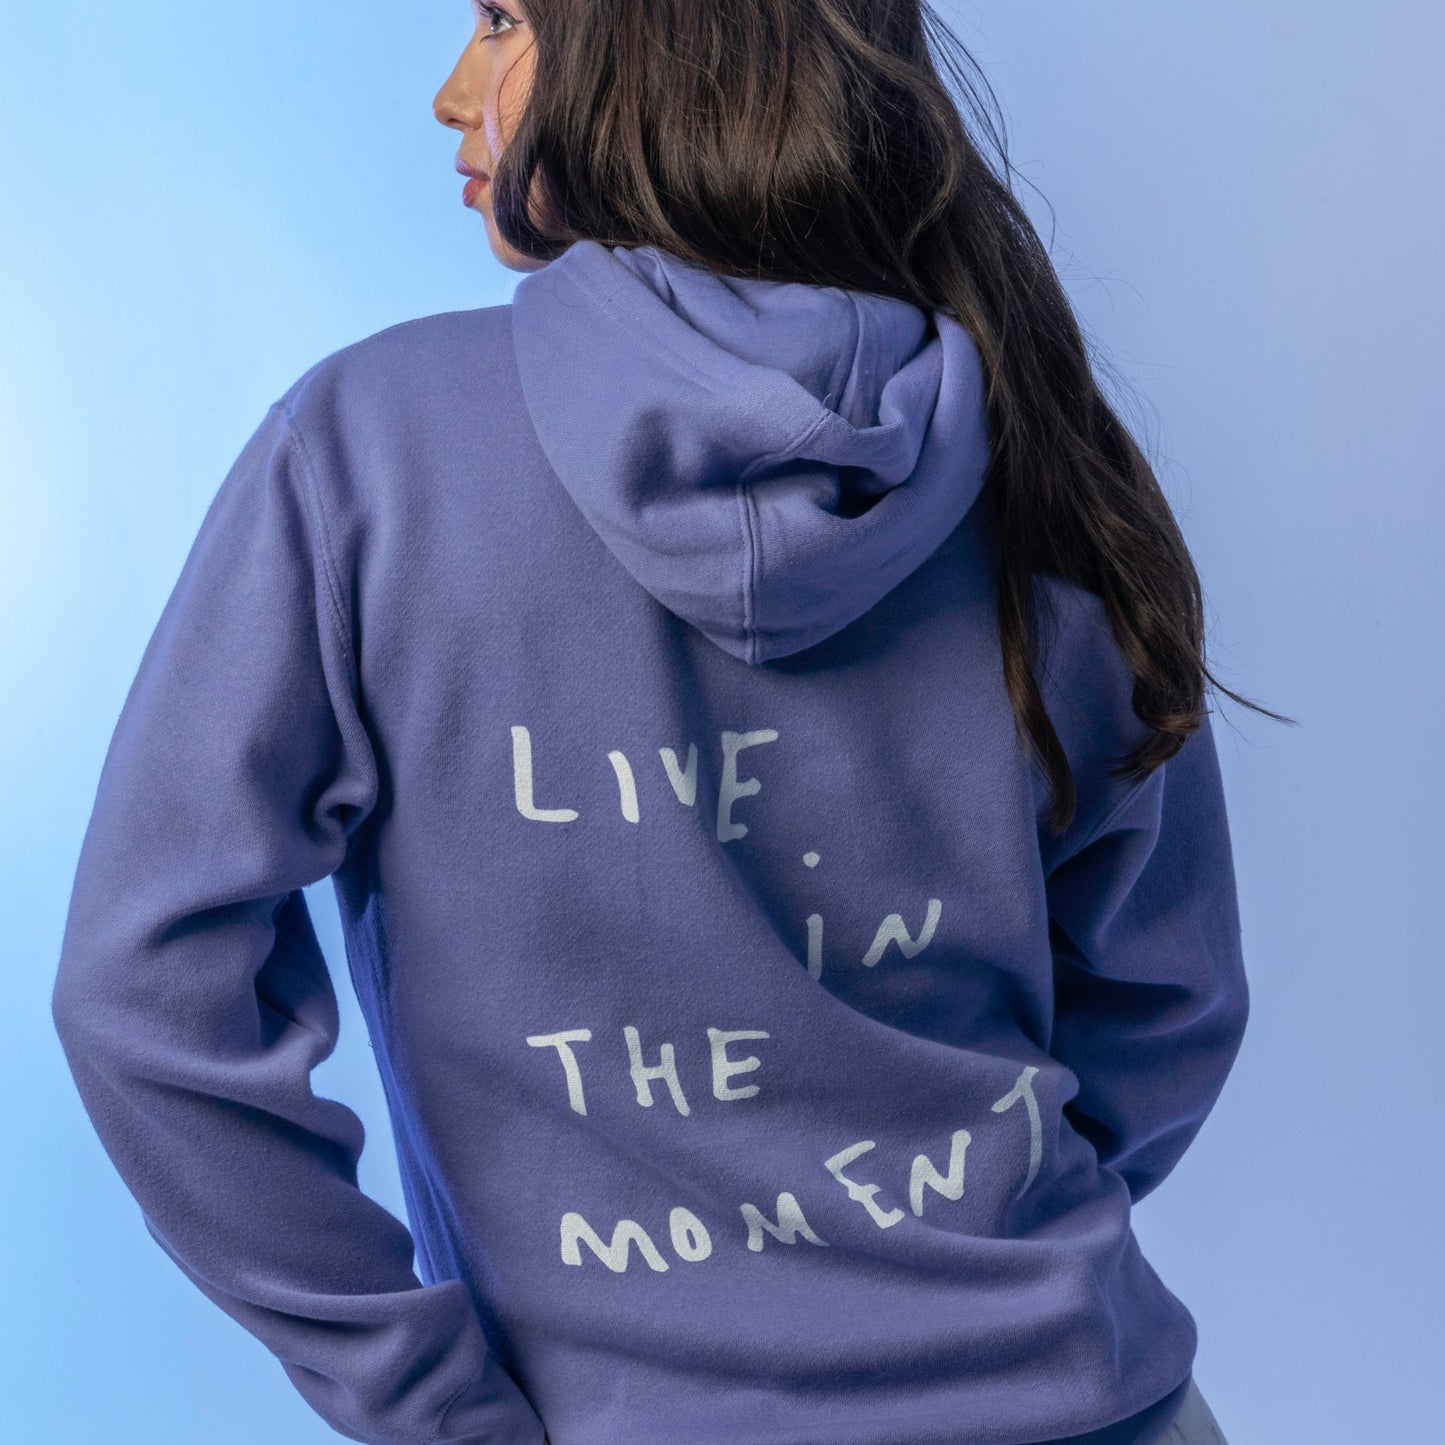 Live In The Moment Hoodie Wear The Peace Hoodies S